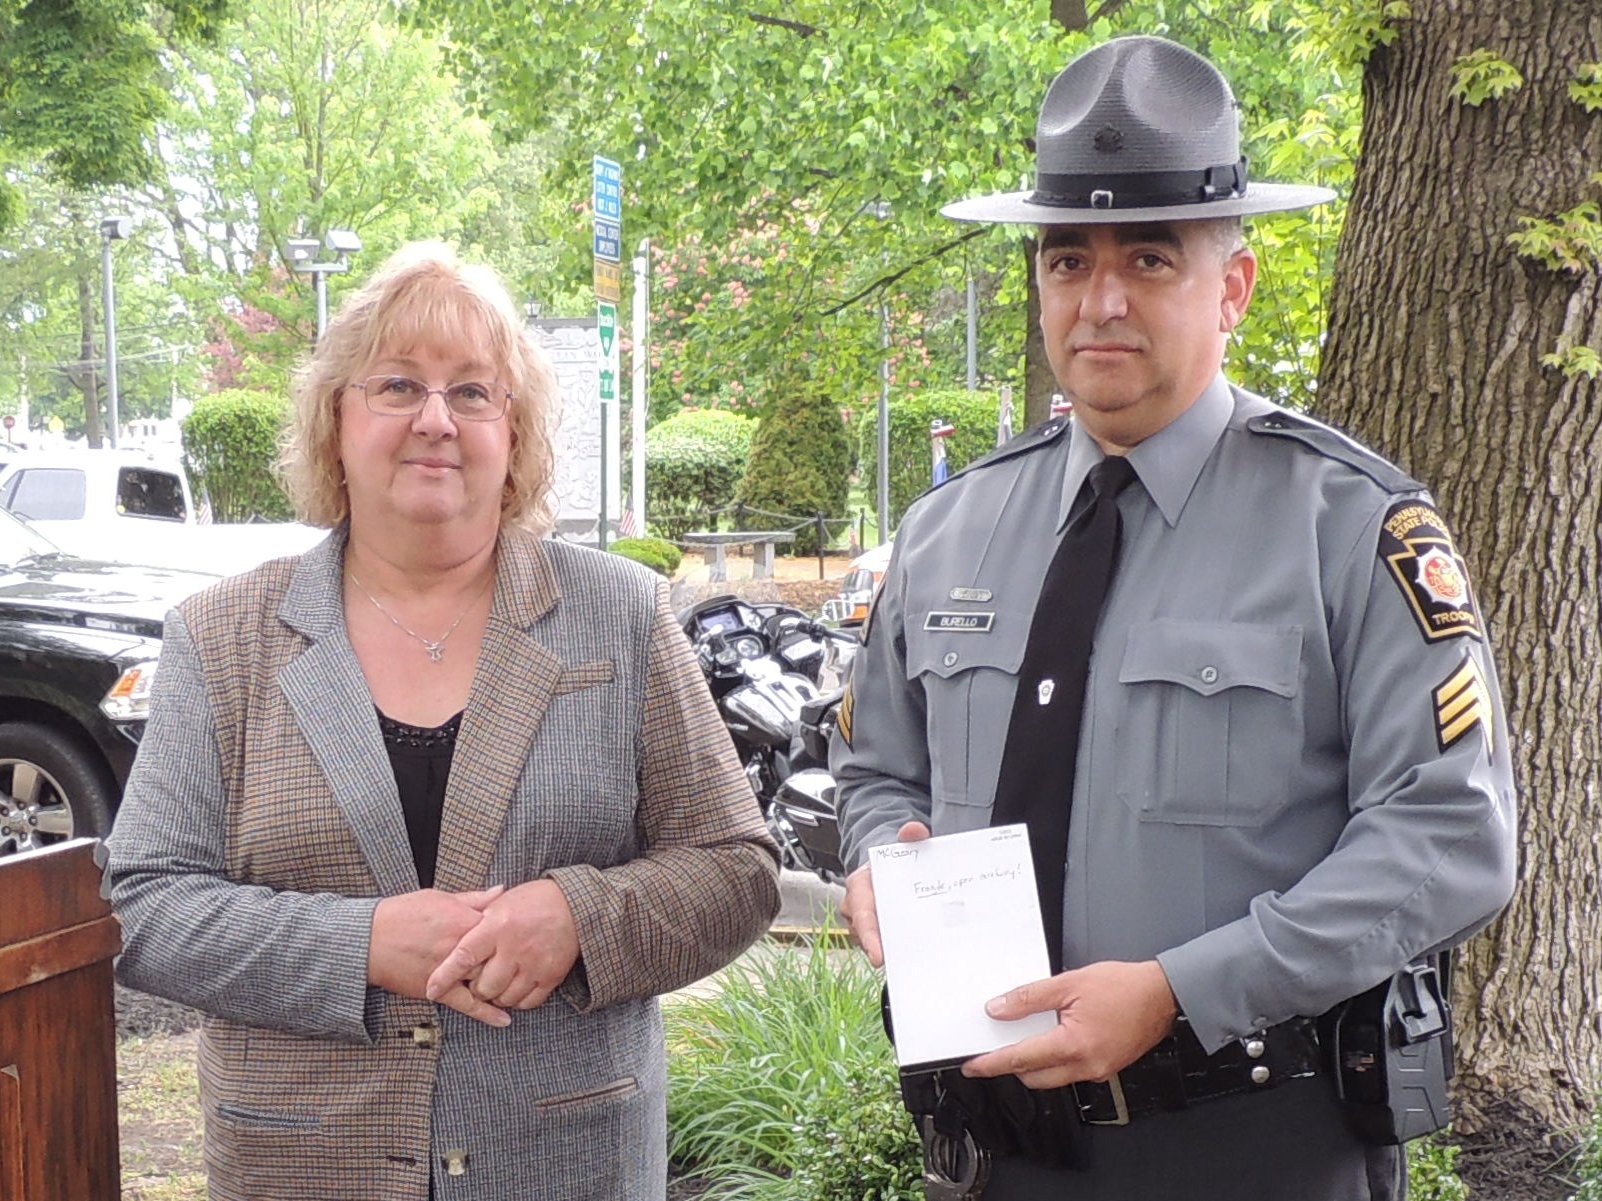 Advocacy Coordinator Millie Anderson presents an award for exemplary service in handling sexual assault cases for State Trooper Clayton McGeary. Accepting on his behalf is State Trooper Bufello.